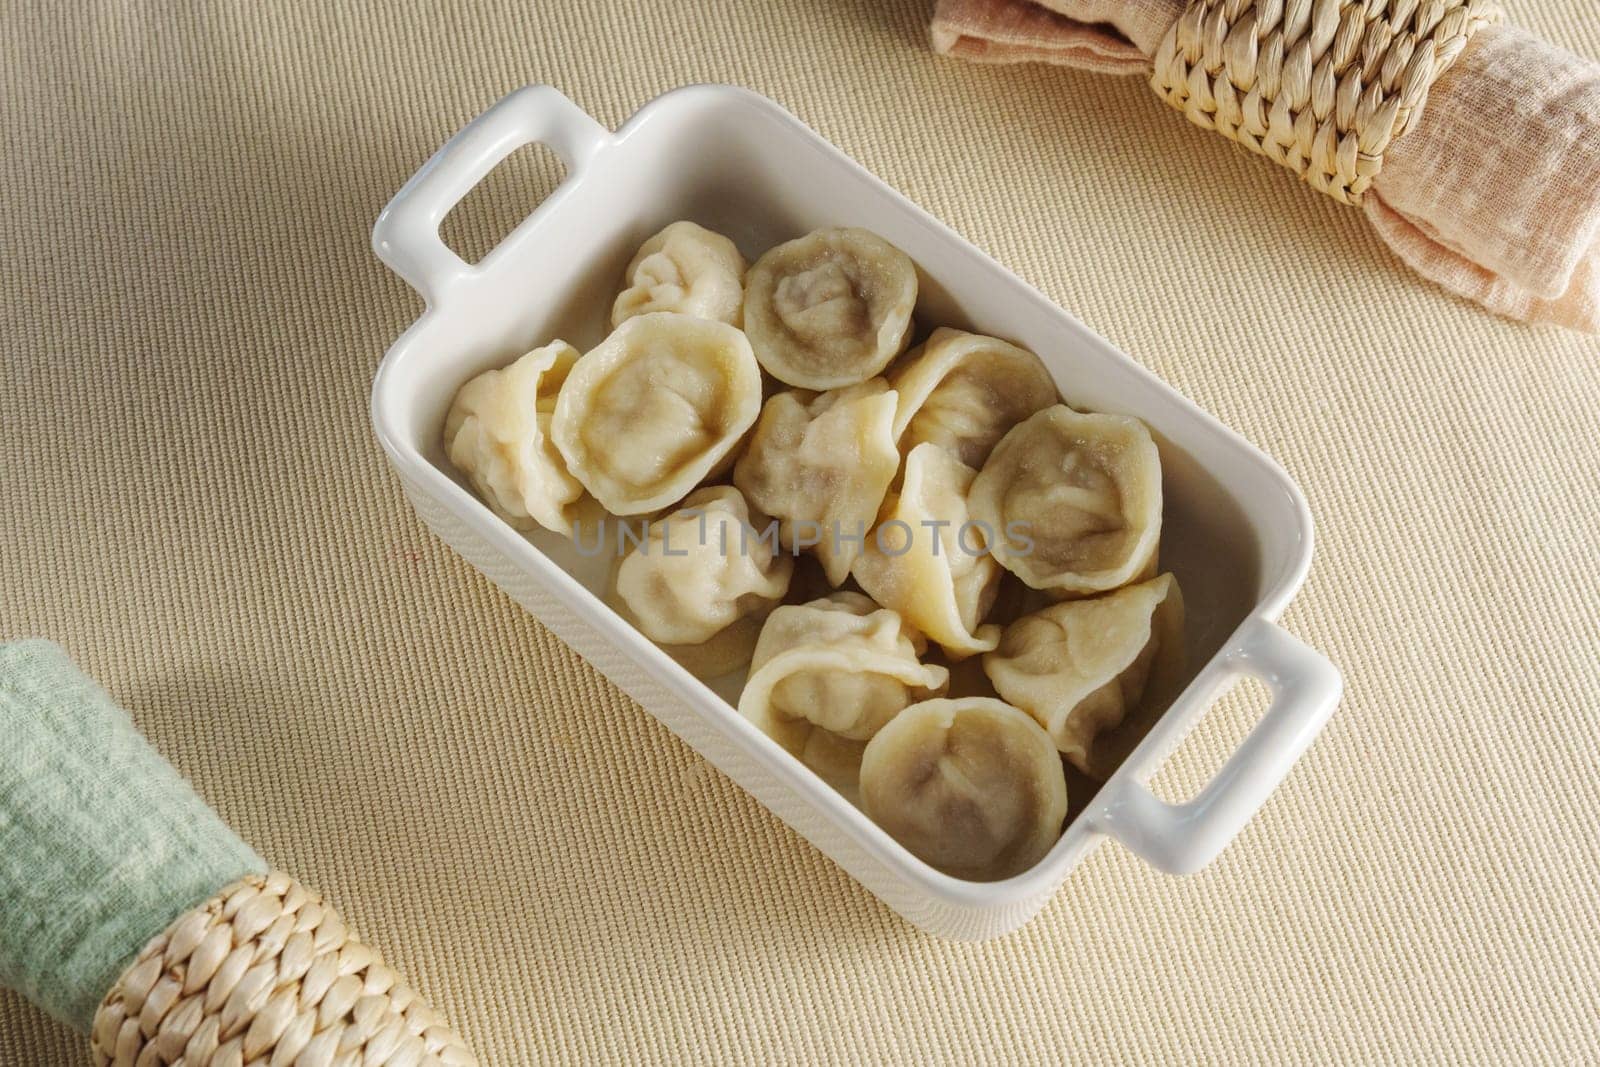 Homemade dumplings, also known as ravioli, ready to be enjoyed.